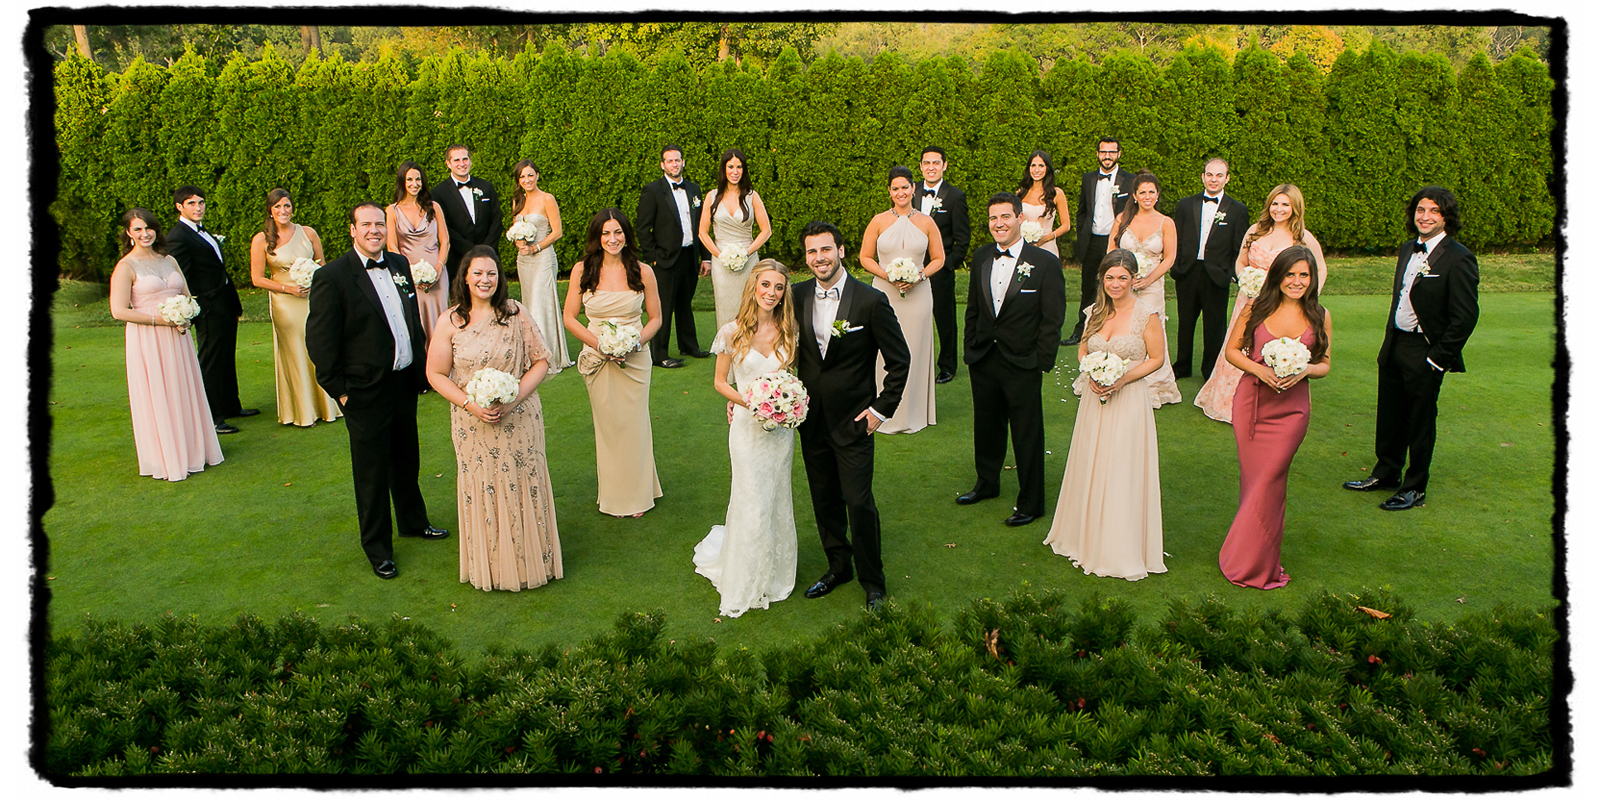 Jayme and Brad's black tie bridal party in shades of pink at Fresh Meadow Country Club.